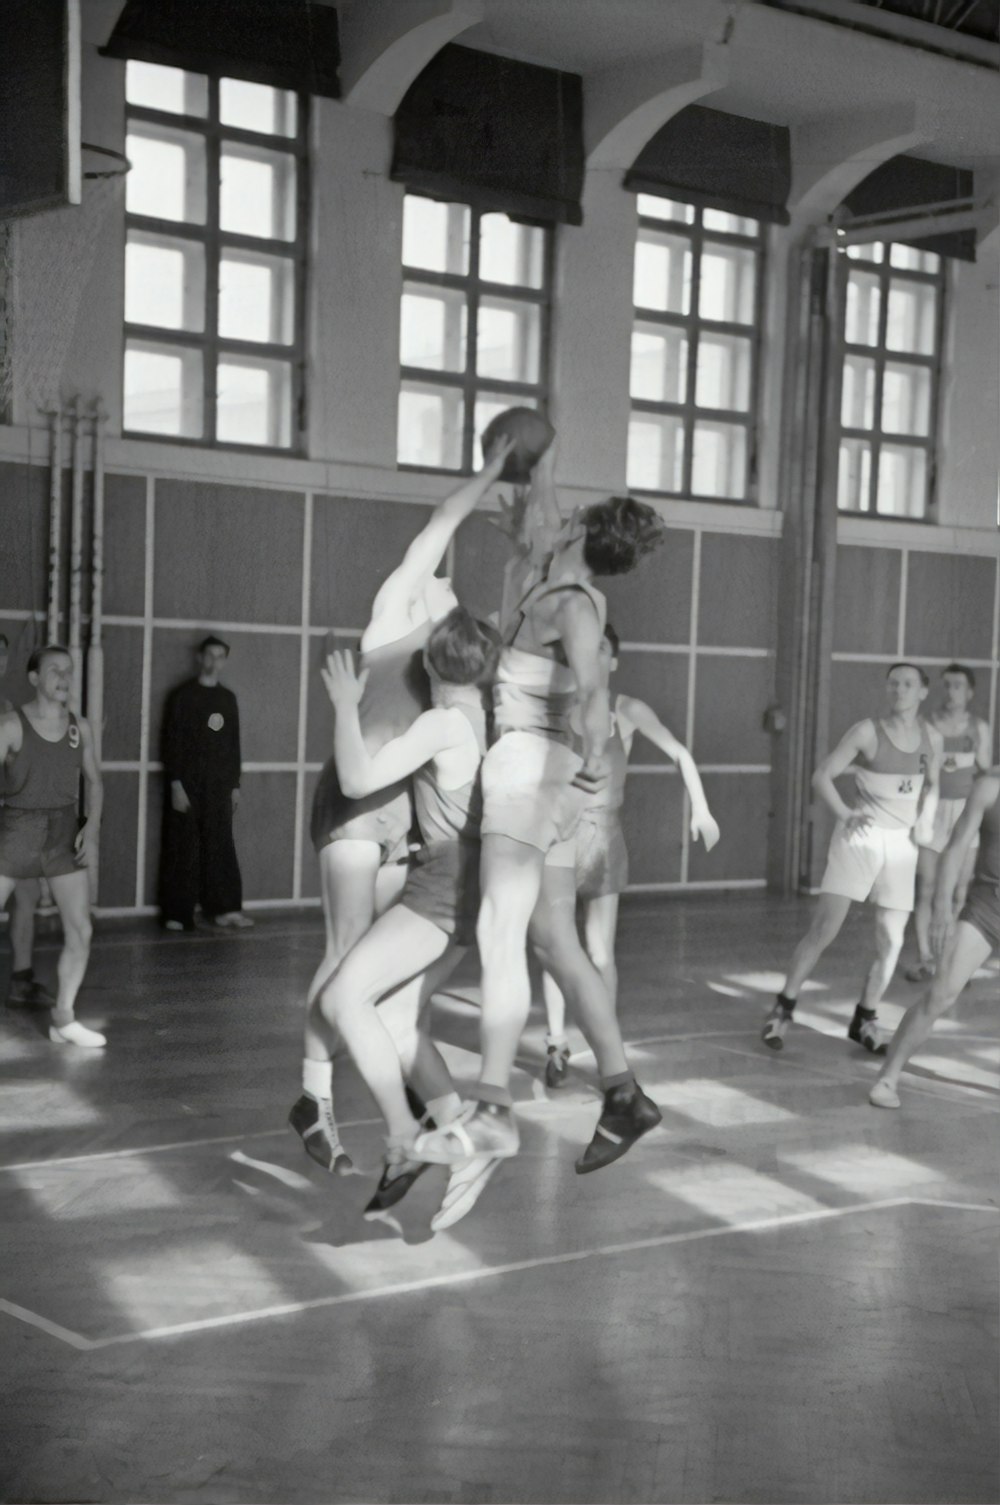 grayscale photography of men playing basketball